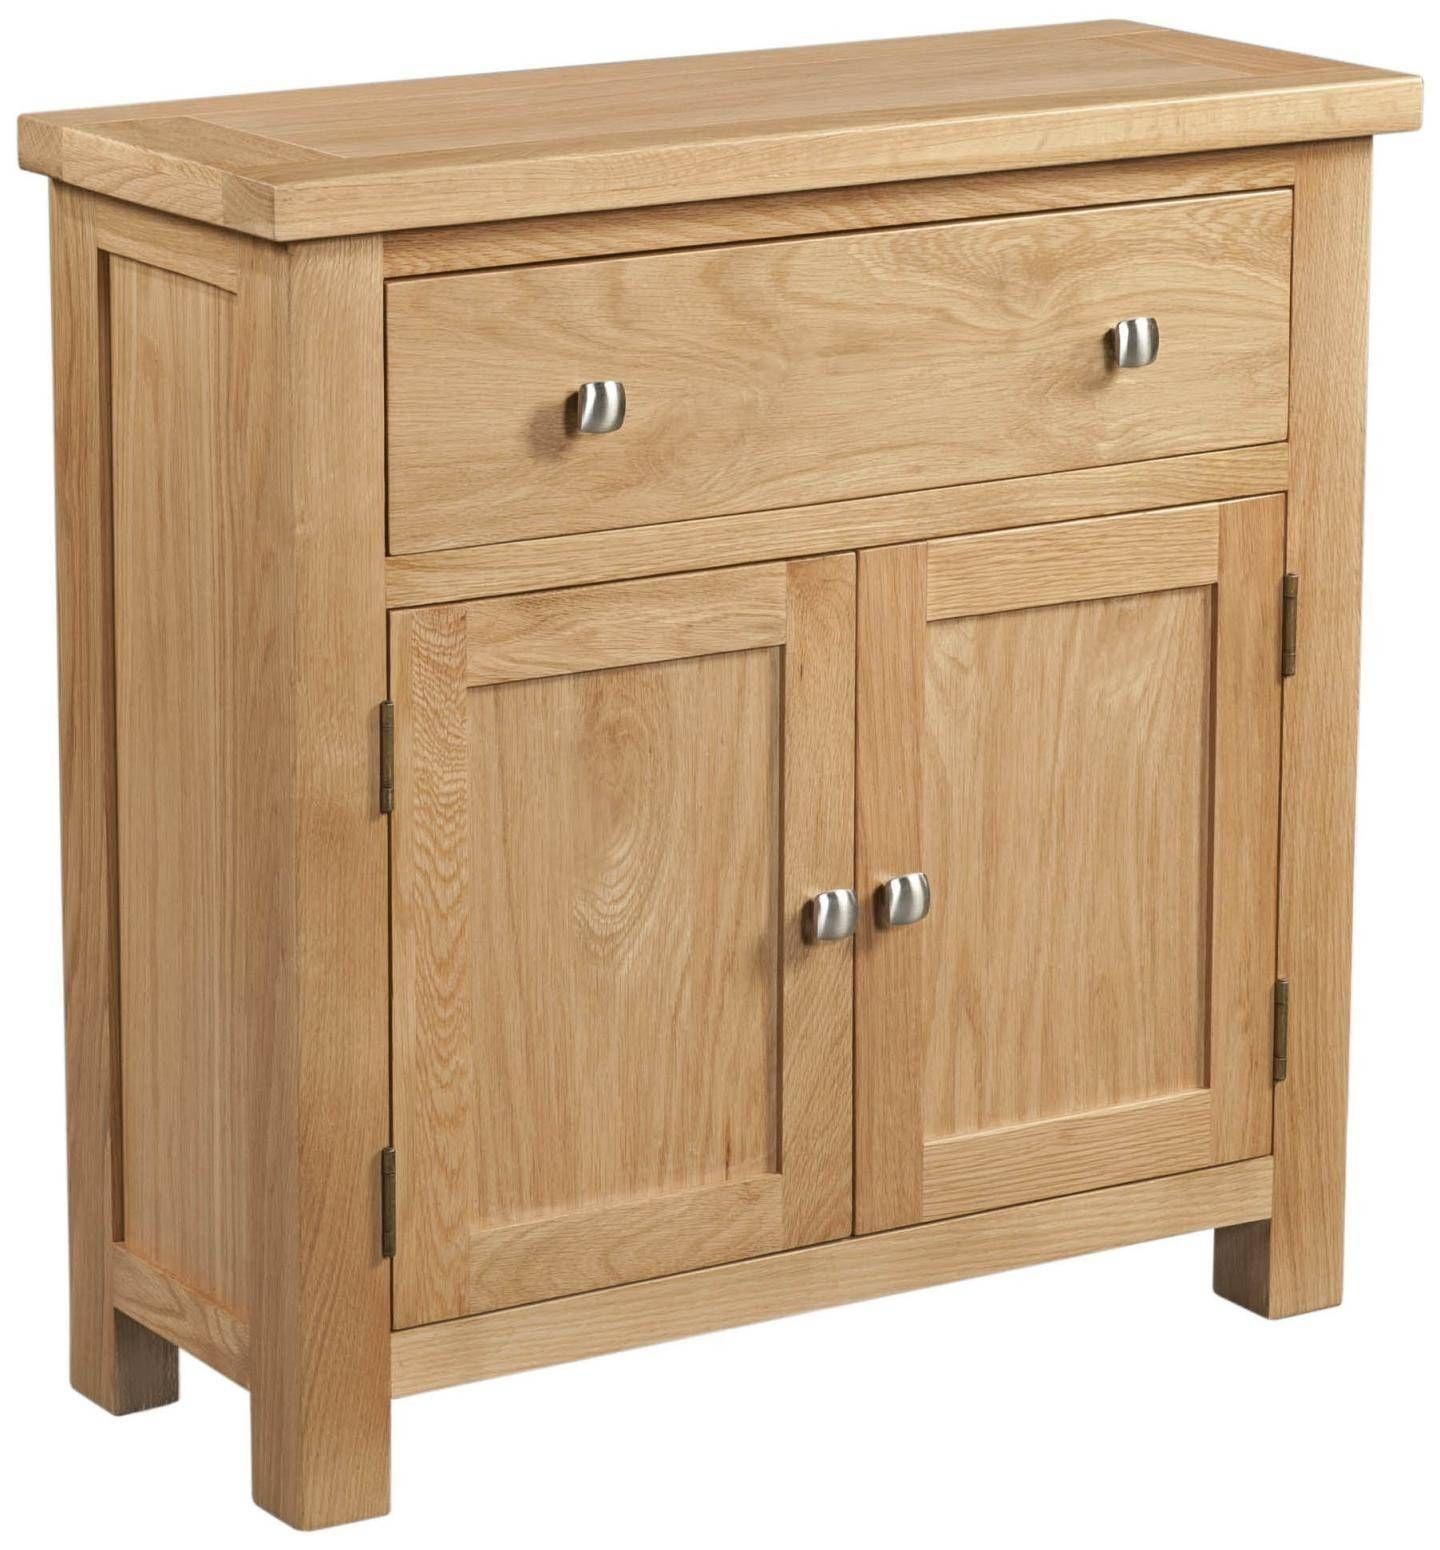 Lovely Pine & Oak Sideboards | Willoby's Furniture Swindon, Wiltshire With Small Sideboards (Photo 7 of 30)